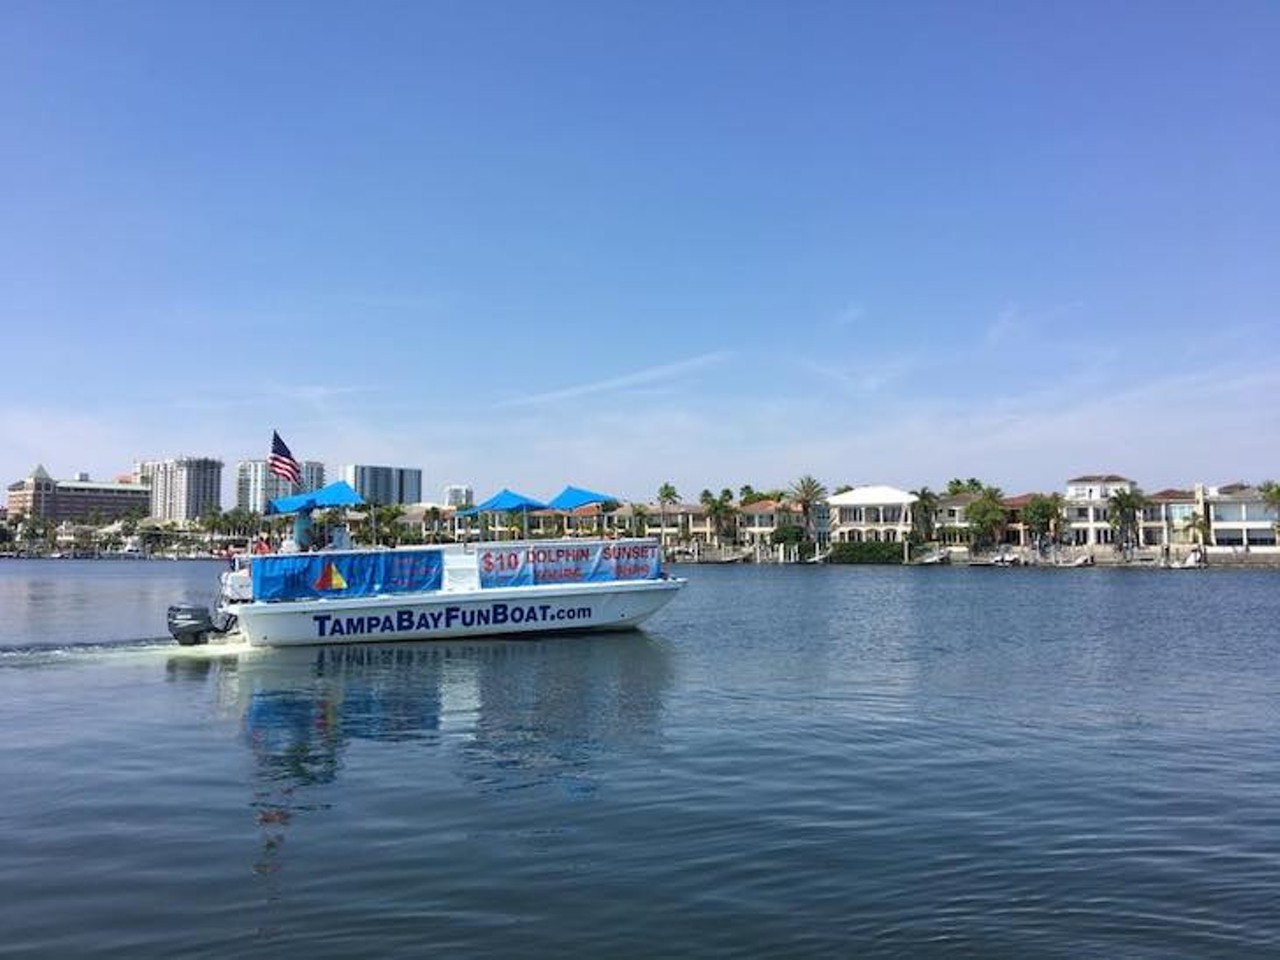 Tampa Bay Fun Boat  
(727) 204-9787
Tampa Bay&#146;s Fun Boat is exactly what it sounds like. Find out where Derrick Jeter lives and the rest of Tampa Bay&#146;s richest residents. Not to mention you can BYOB, while you experience the city through the sea until 7 p.m.
Photo via Tampa Fun Boat/Facebook